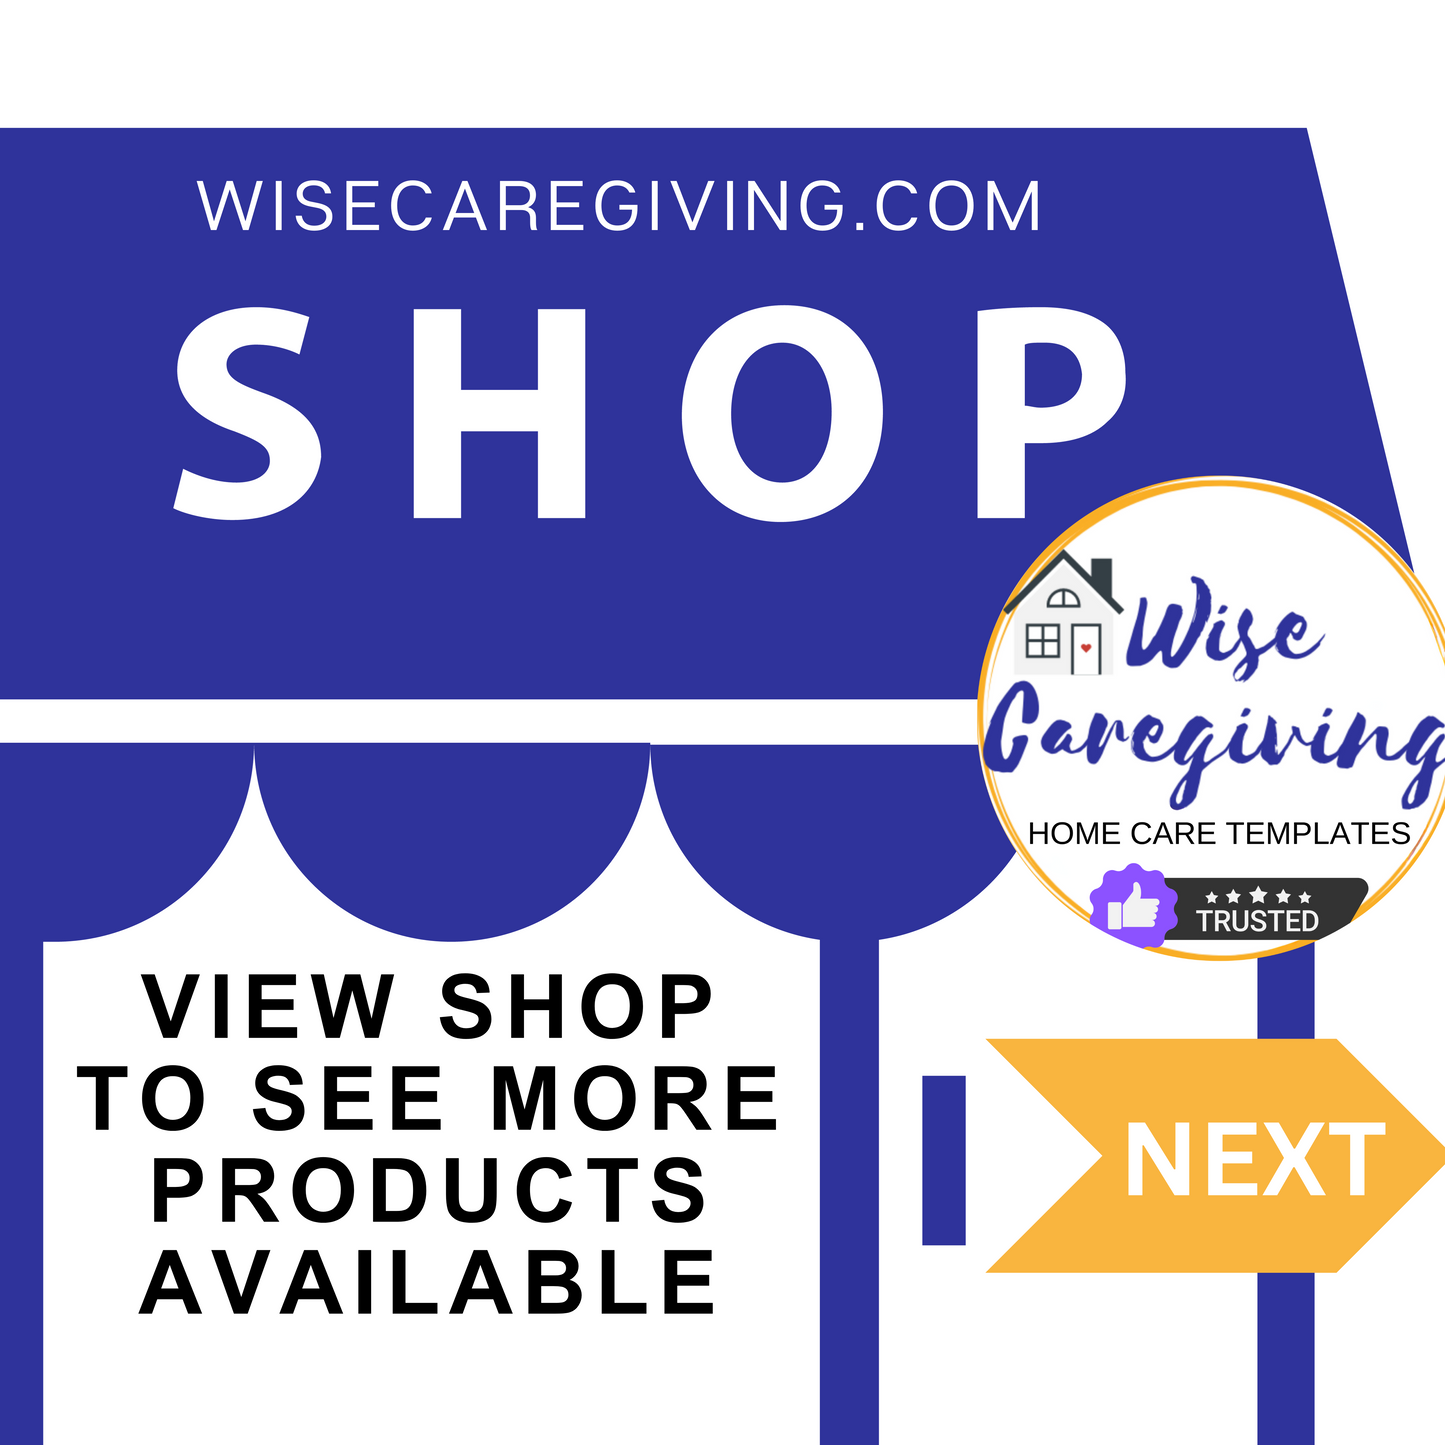 Caregiver Task List Template for New Home Care Clients